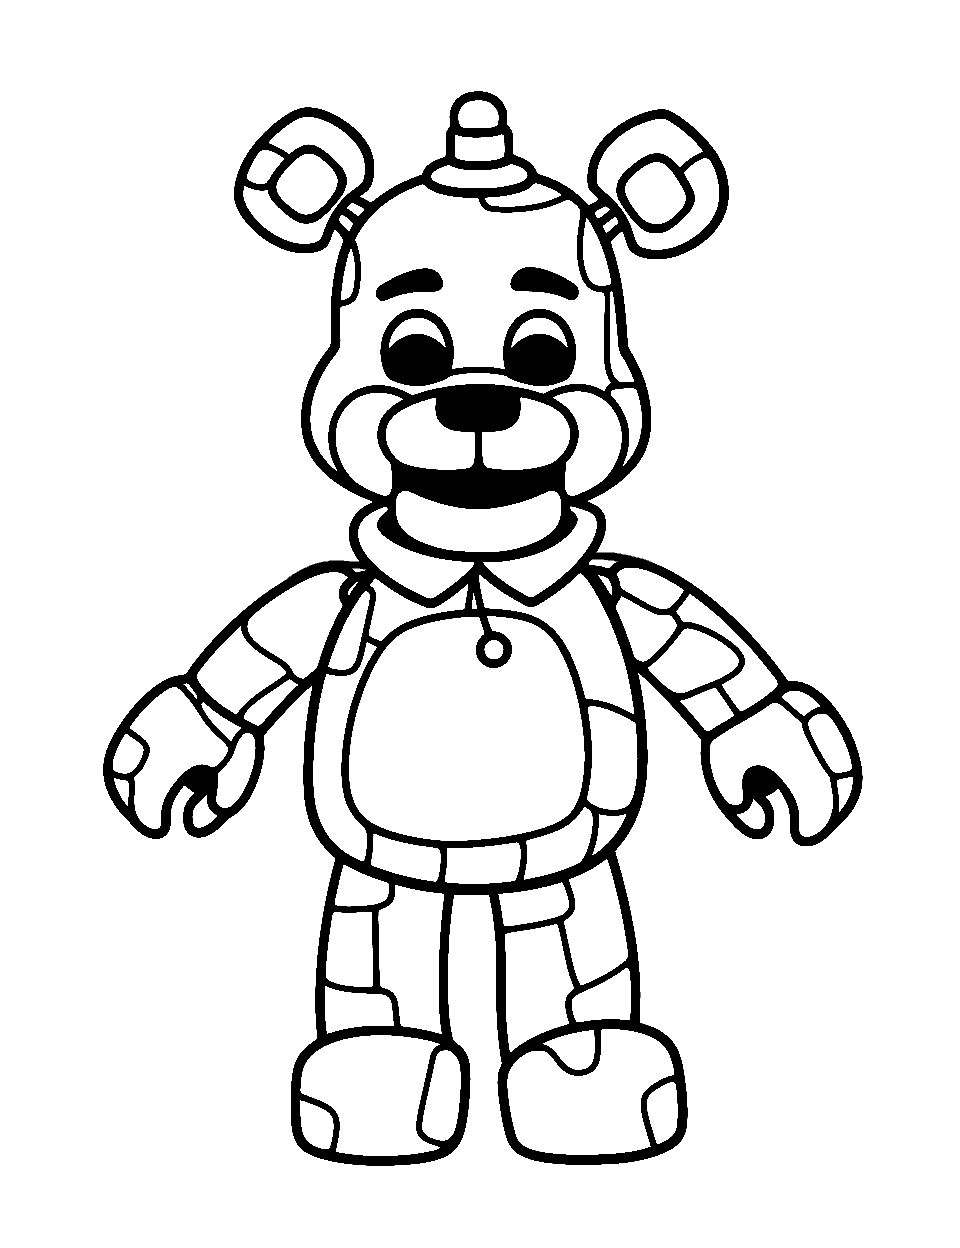 Minimalistic Fredbear Coloring Page - Fredbear in a minimalistic, easy-to-color design with no background.